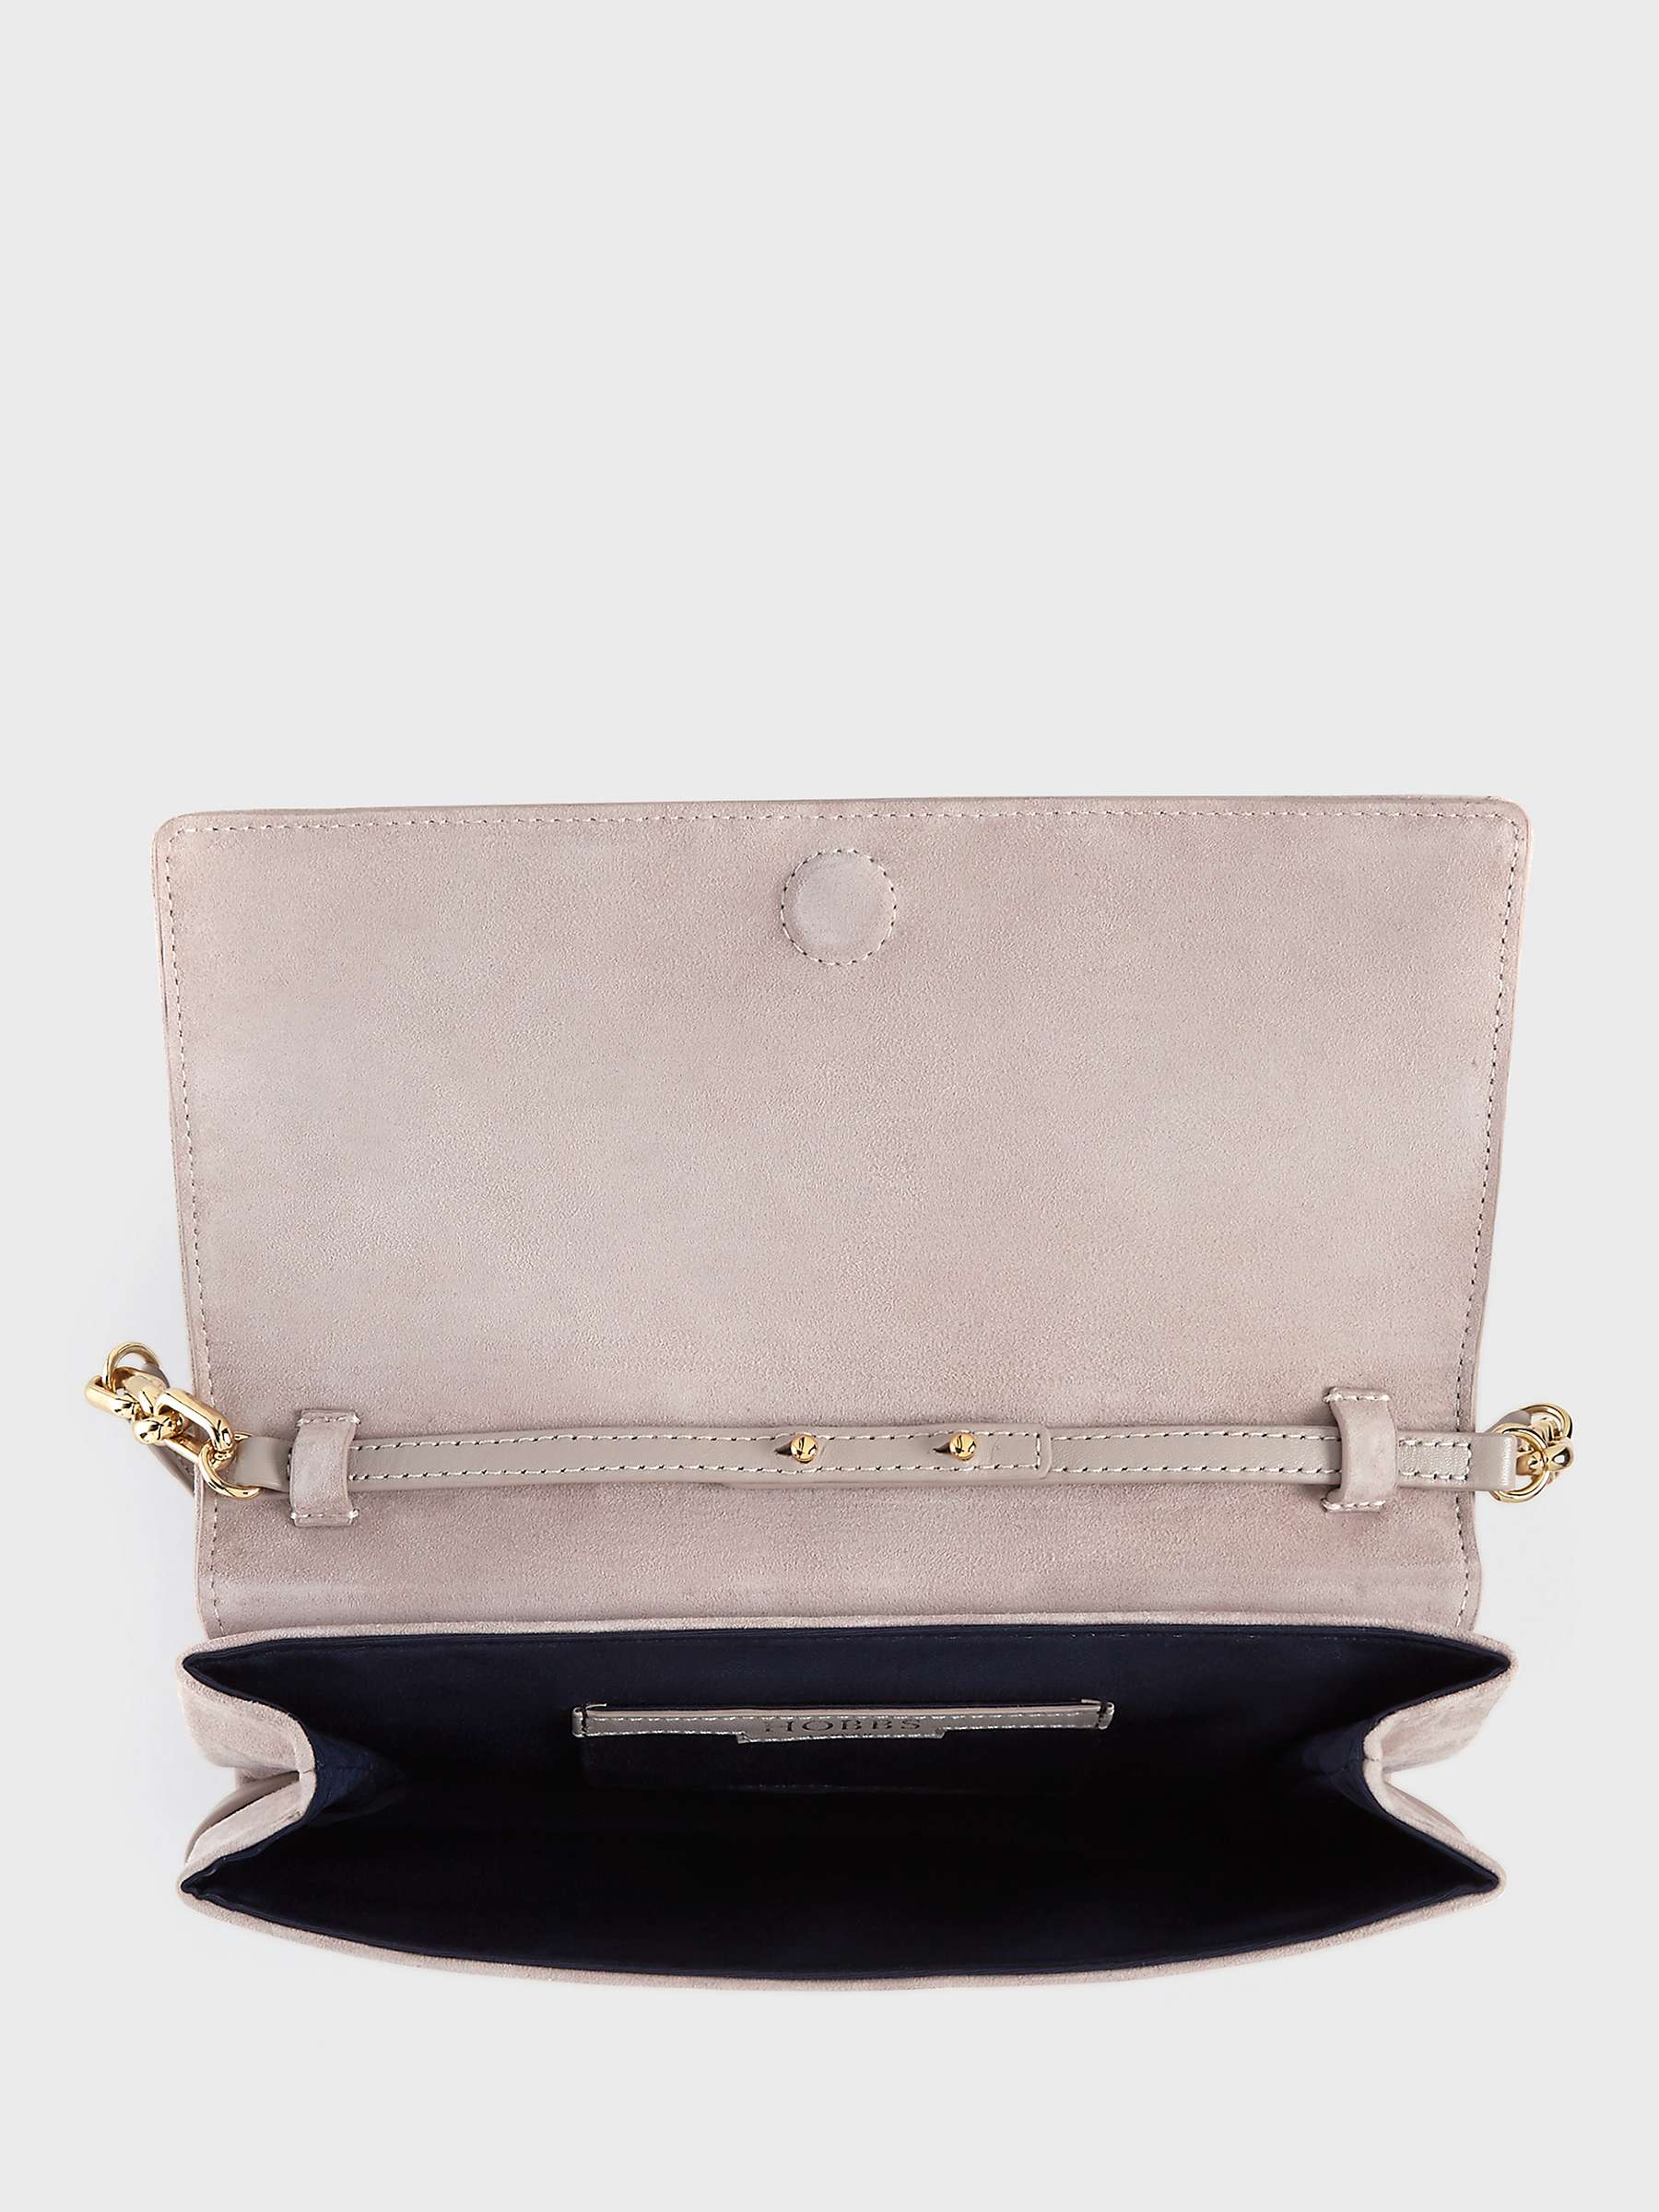 Hobbs Honour Suede and Leather Clutch Bag, Oyster at John Lewis & Partners